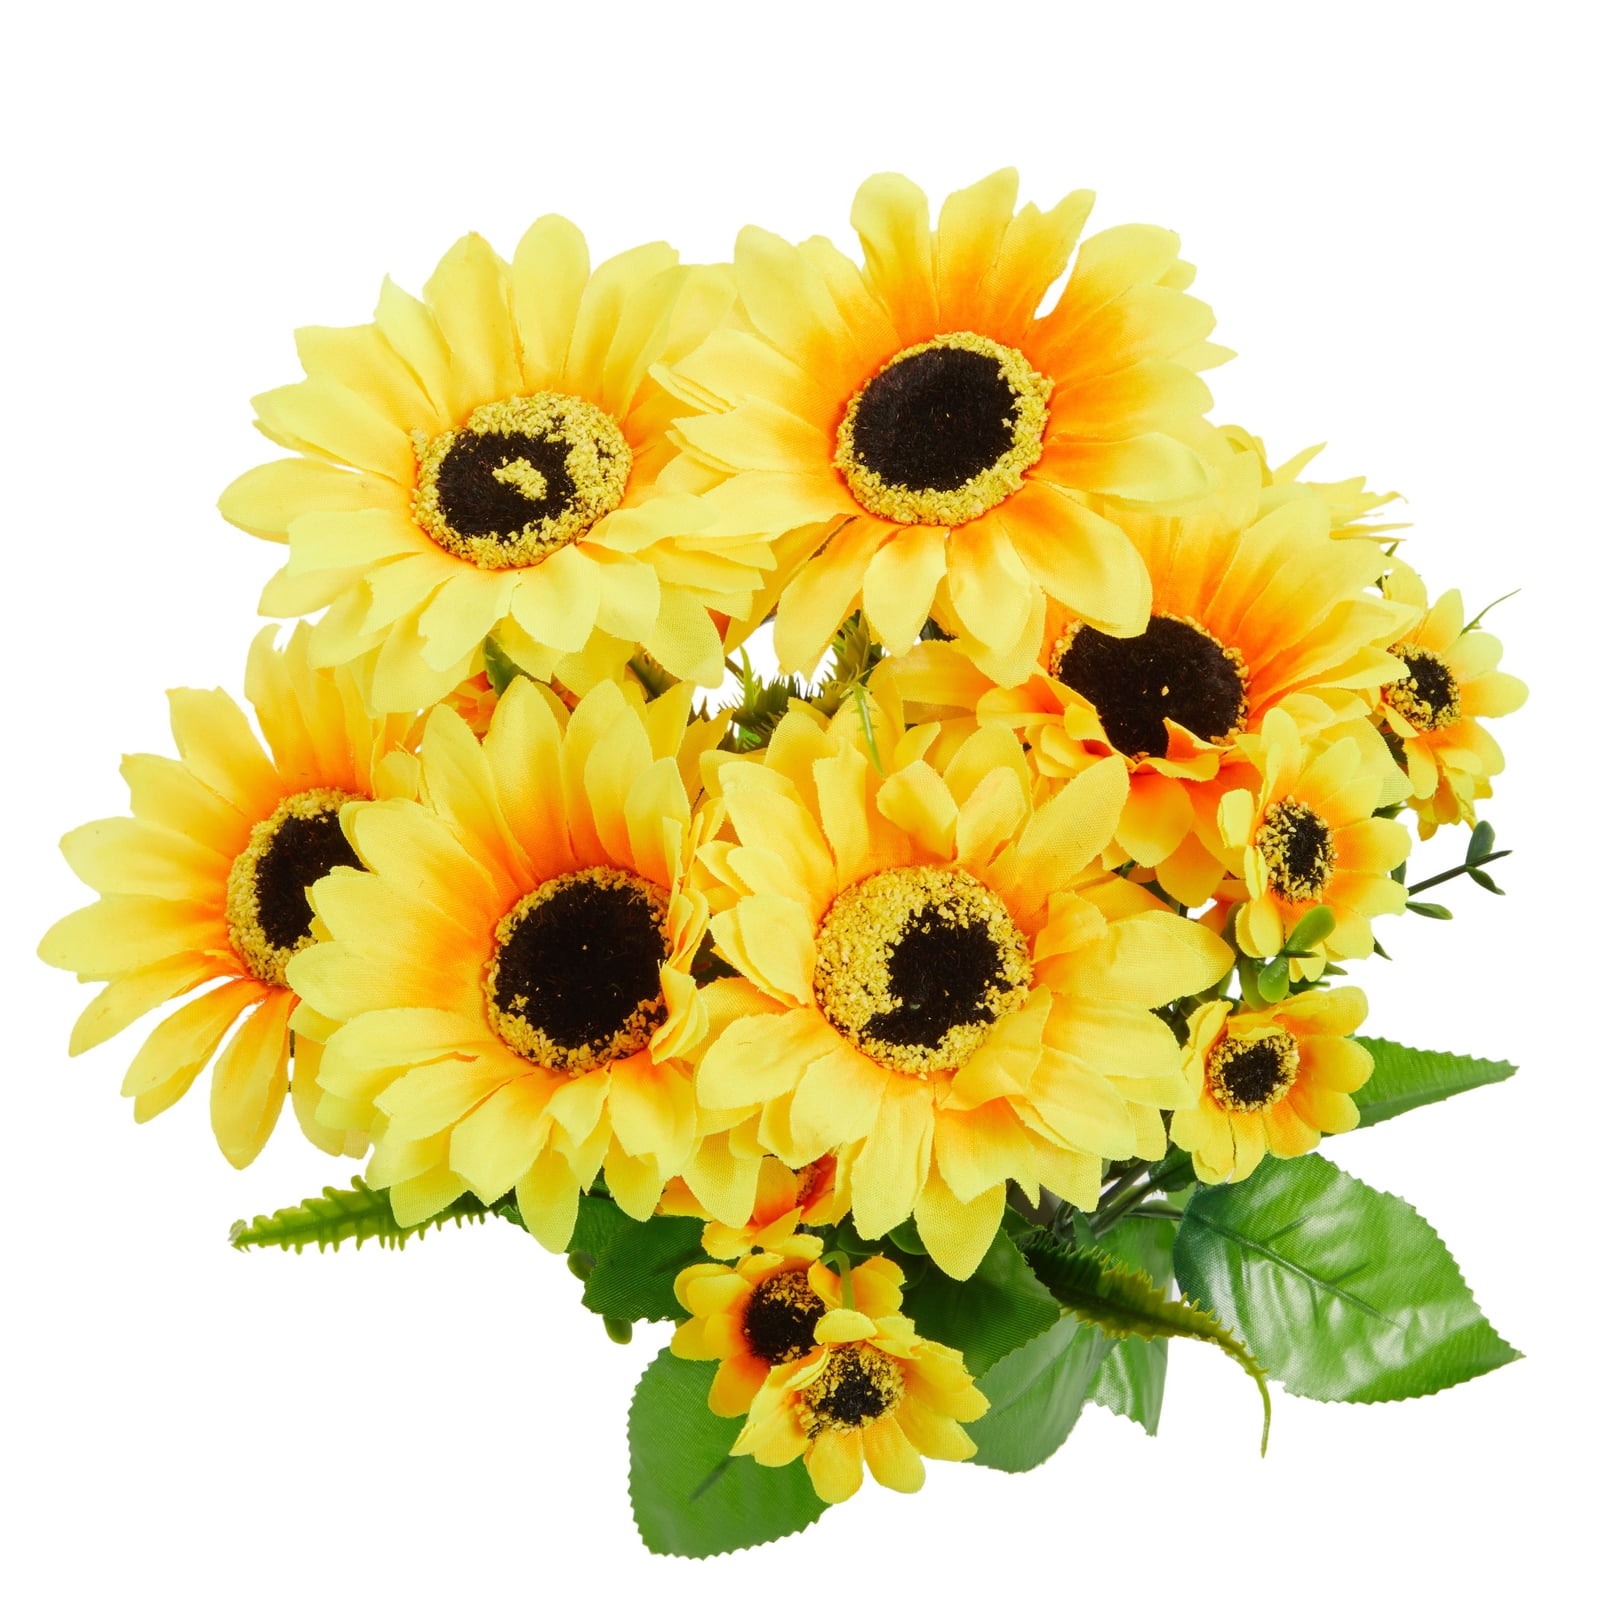 Paper Fans for Birthday Party Wedding Baby Shower Decoration Sunflower Cake Toppers 23 Pieces Sunflower Party Decorations Set Include Sunflower Banner Artificial Sunflower Vine